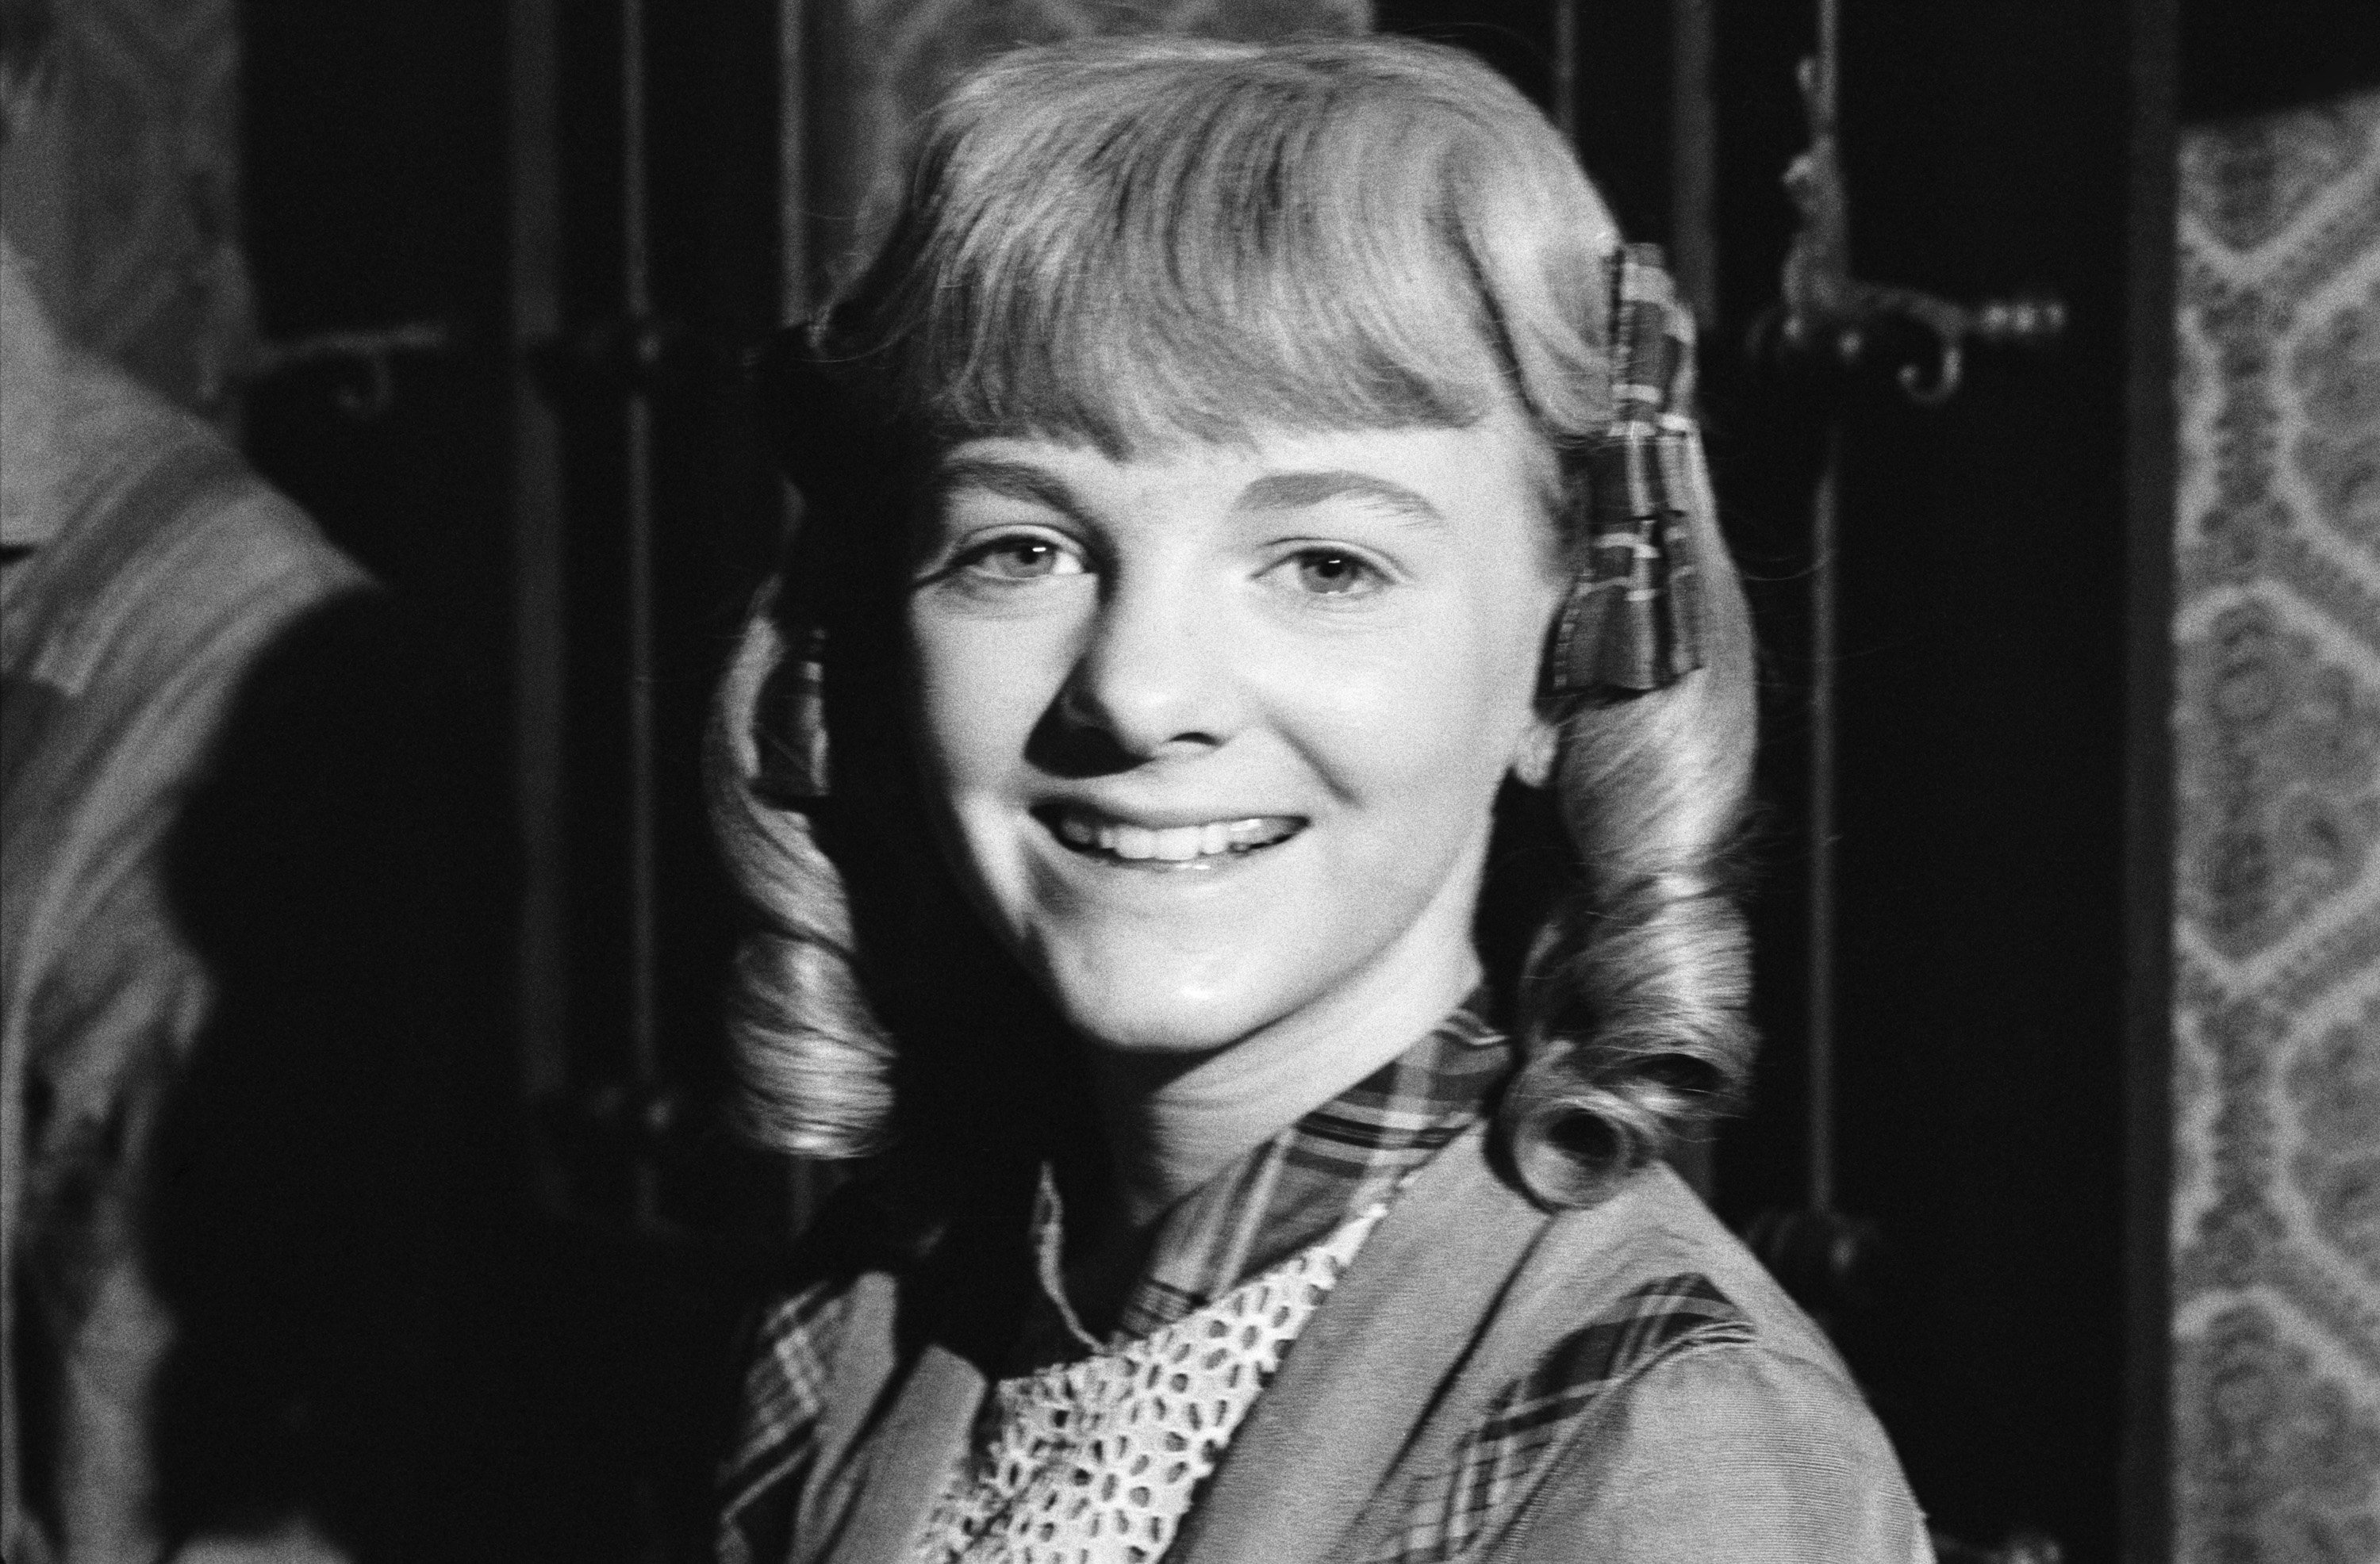 ‘Little House on the Prairie’: Alison Arngrim Said Some of Her Co-Stars Complained ‘Bitterly’ That They Were ‘Underpaid’